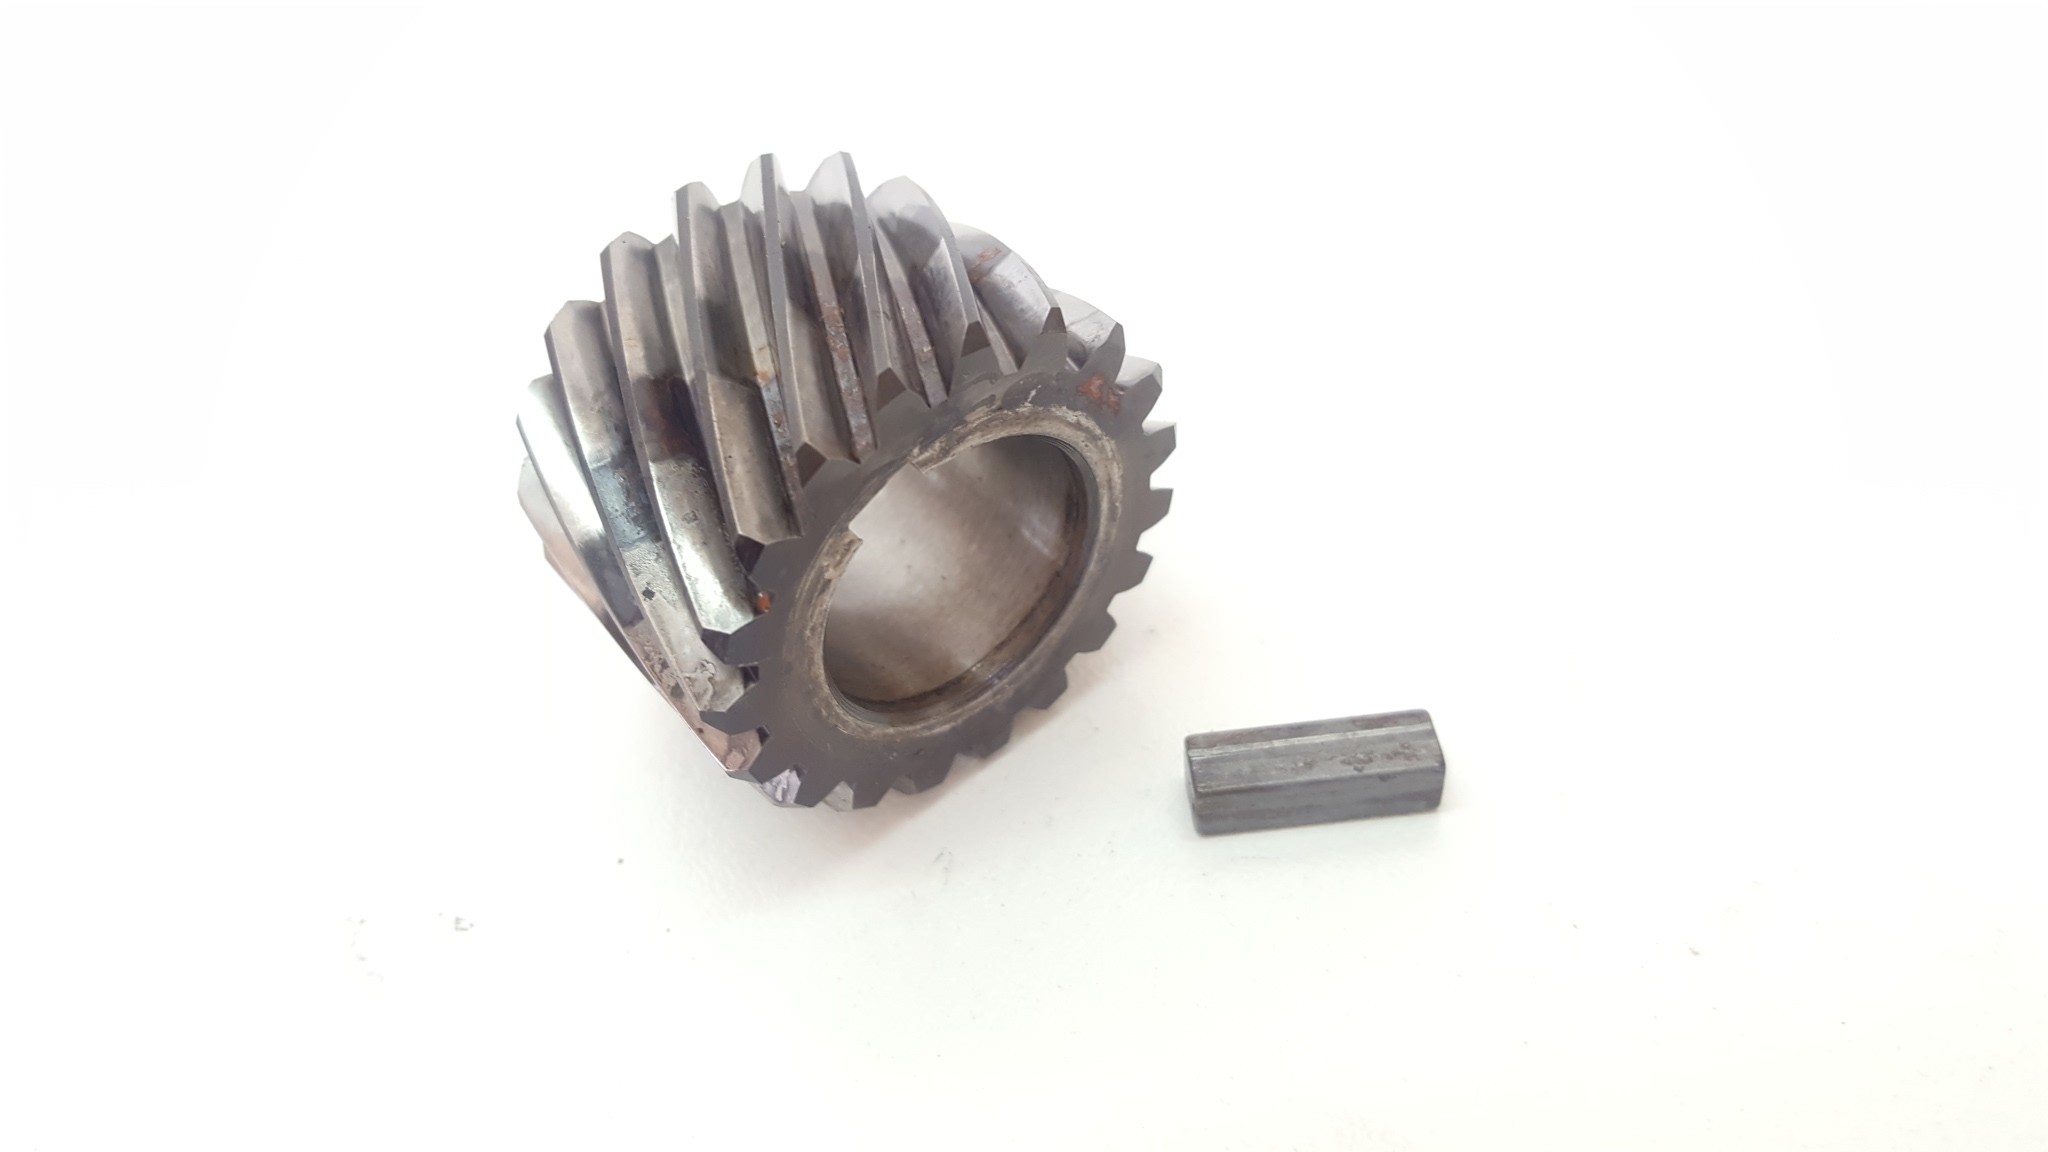 Primary Drive Gear Yamaha YZ80 1985 and other years Some wear.